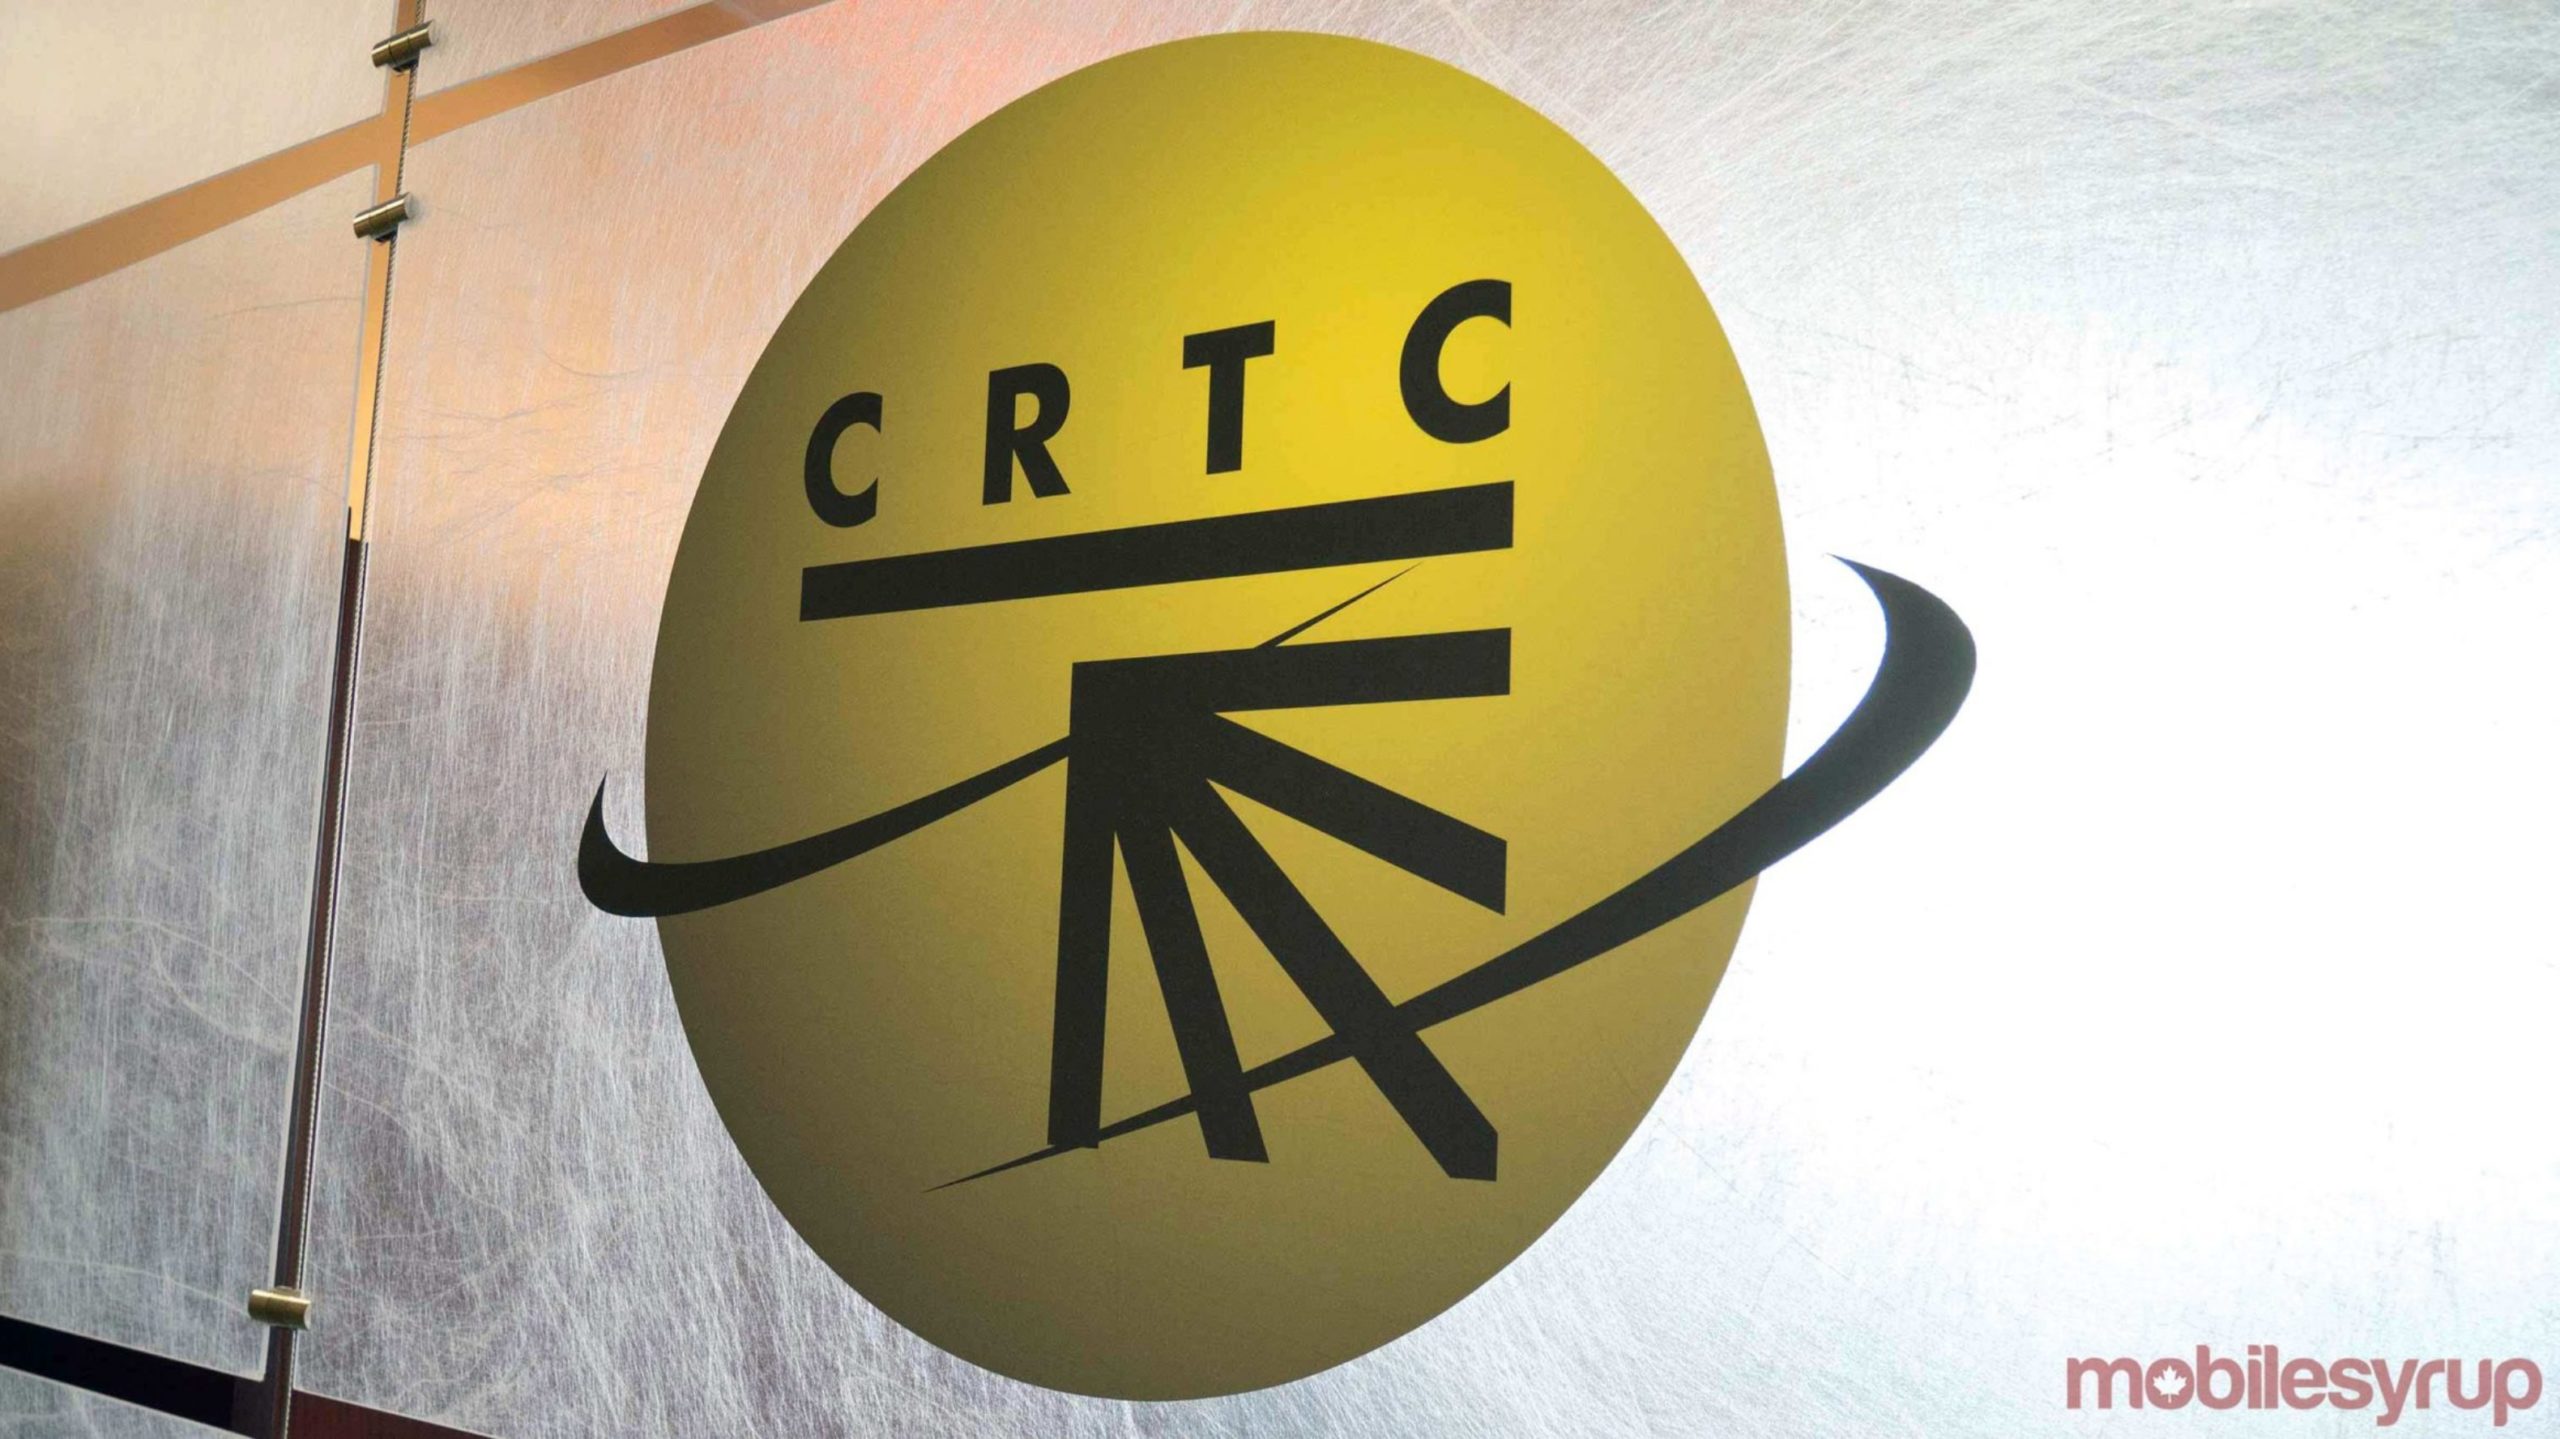 CRTC says concerns about phone bills heard 'loud and clear'